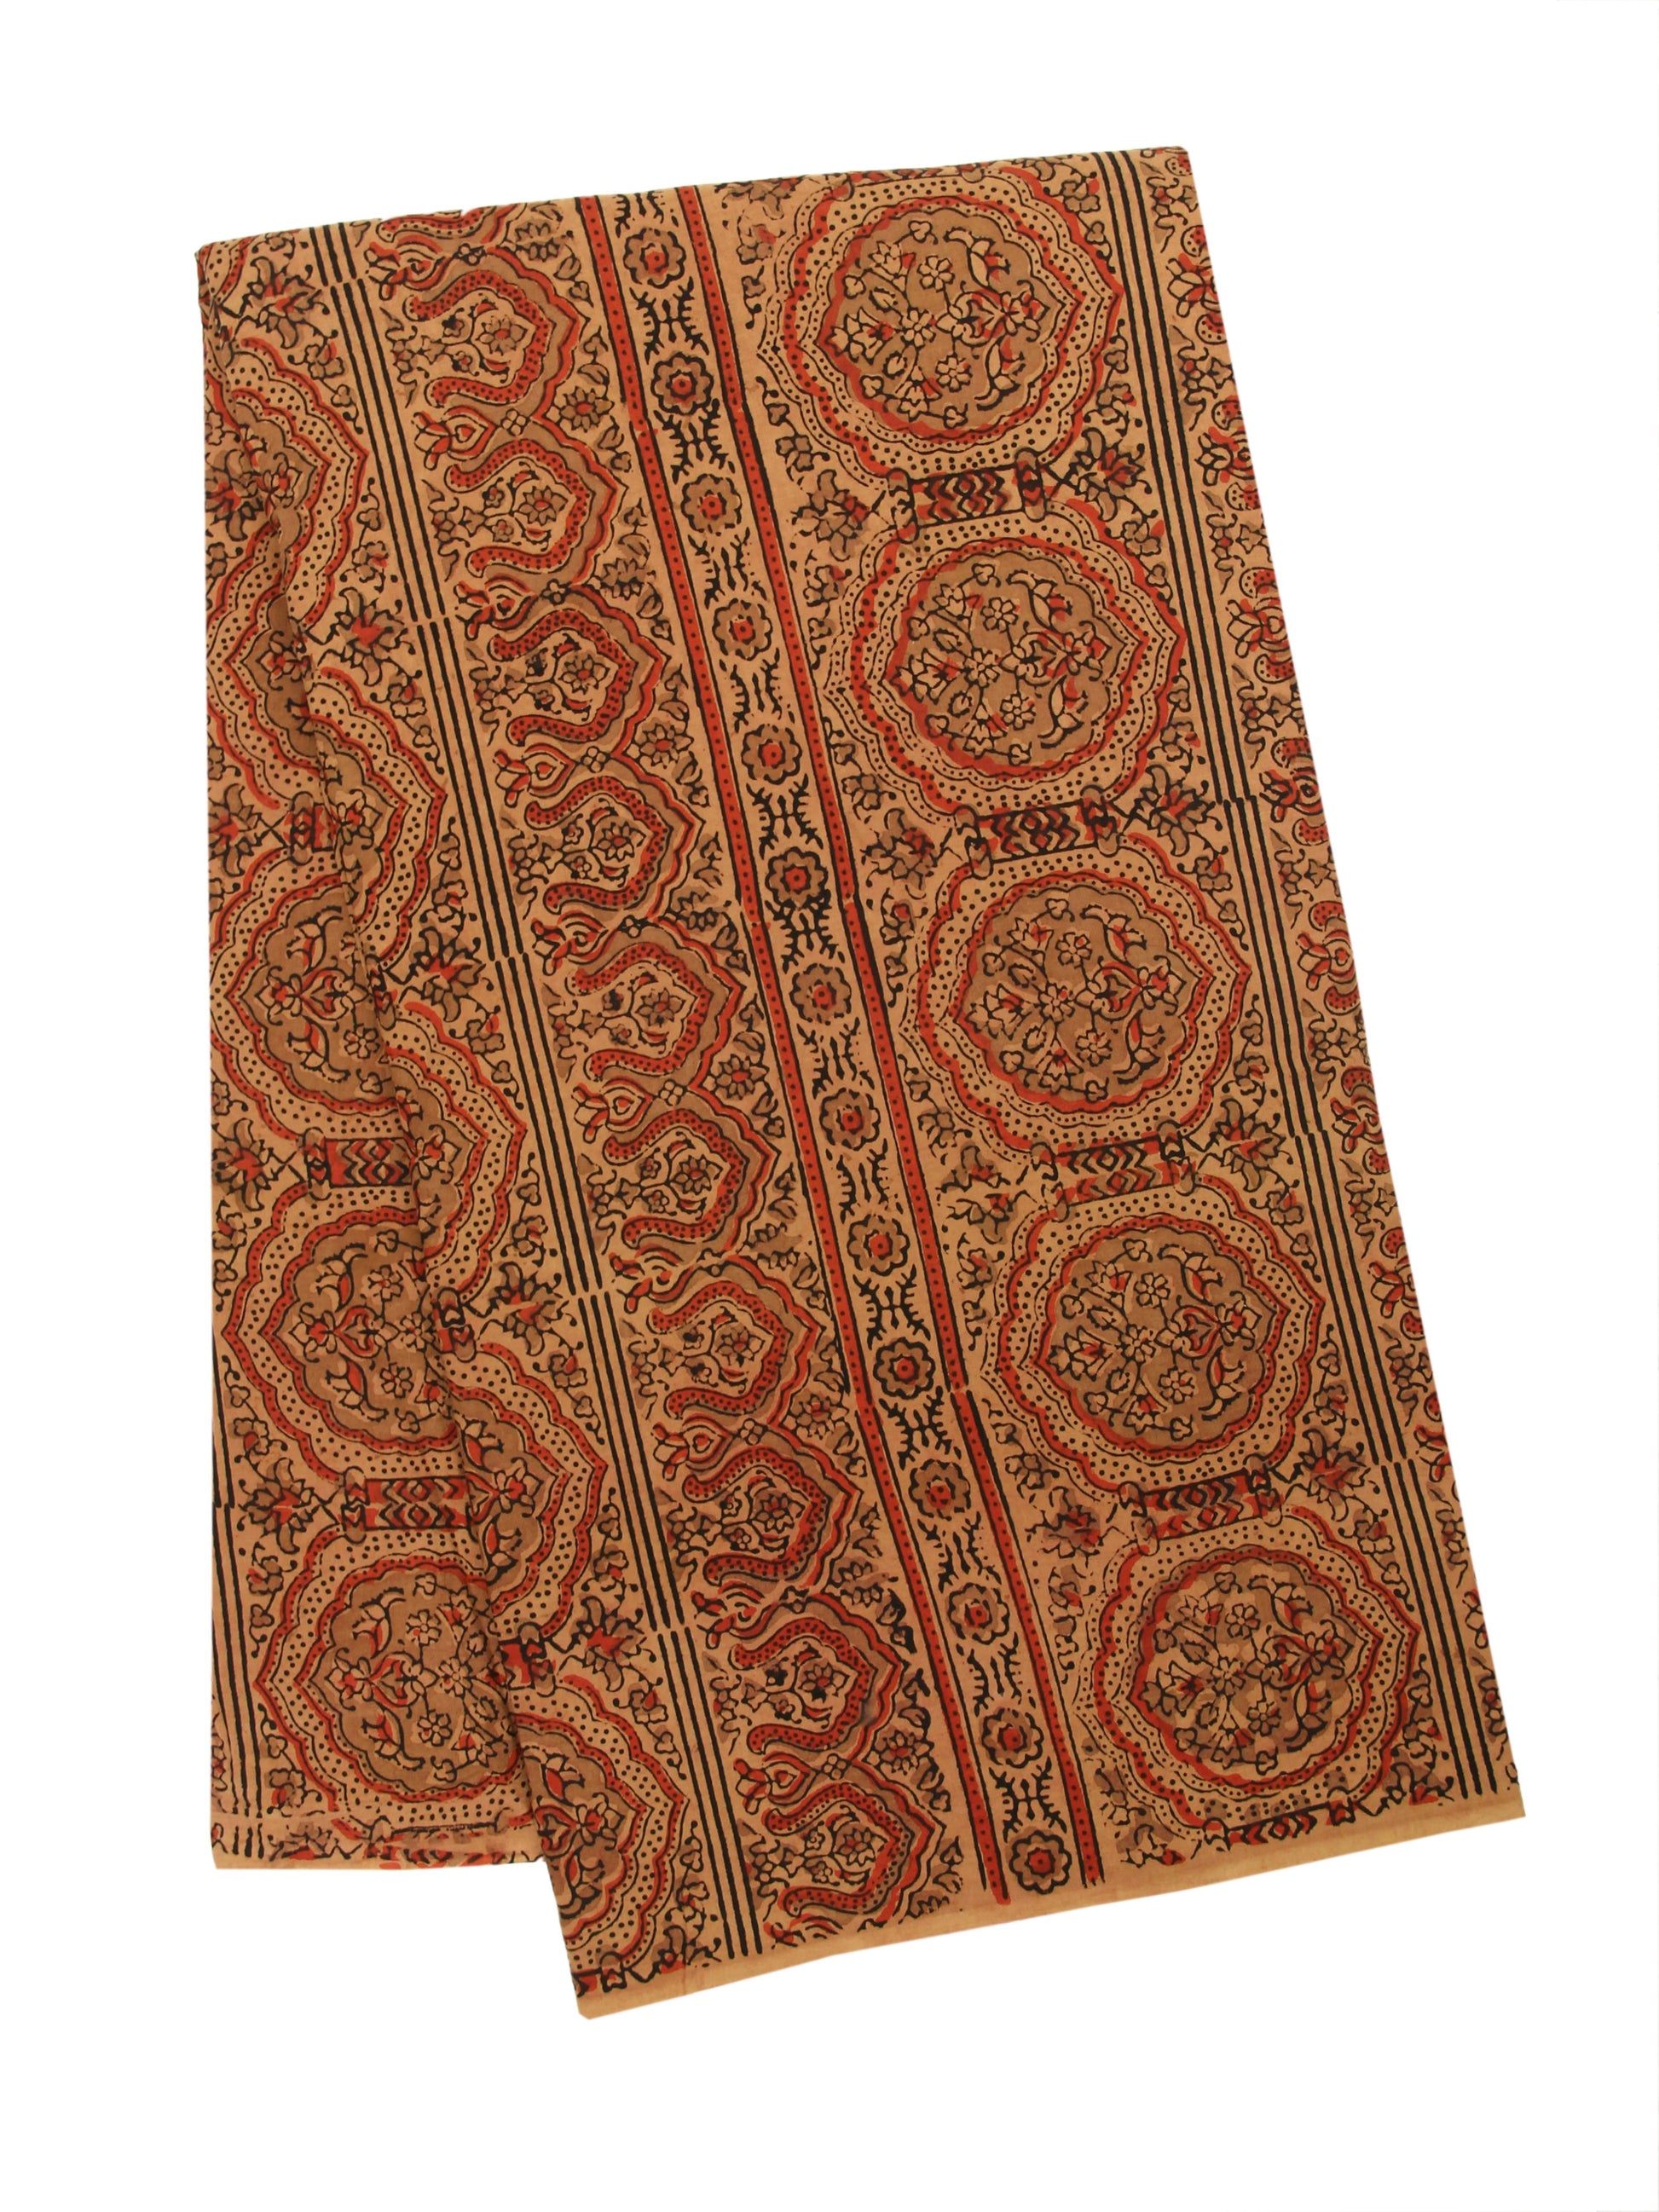 Natural dyed earthy peach ajrakh fabric, Ajrakh hand block print cotton fabric, Slow fashion